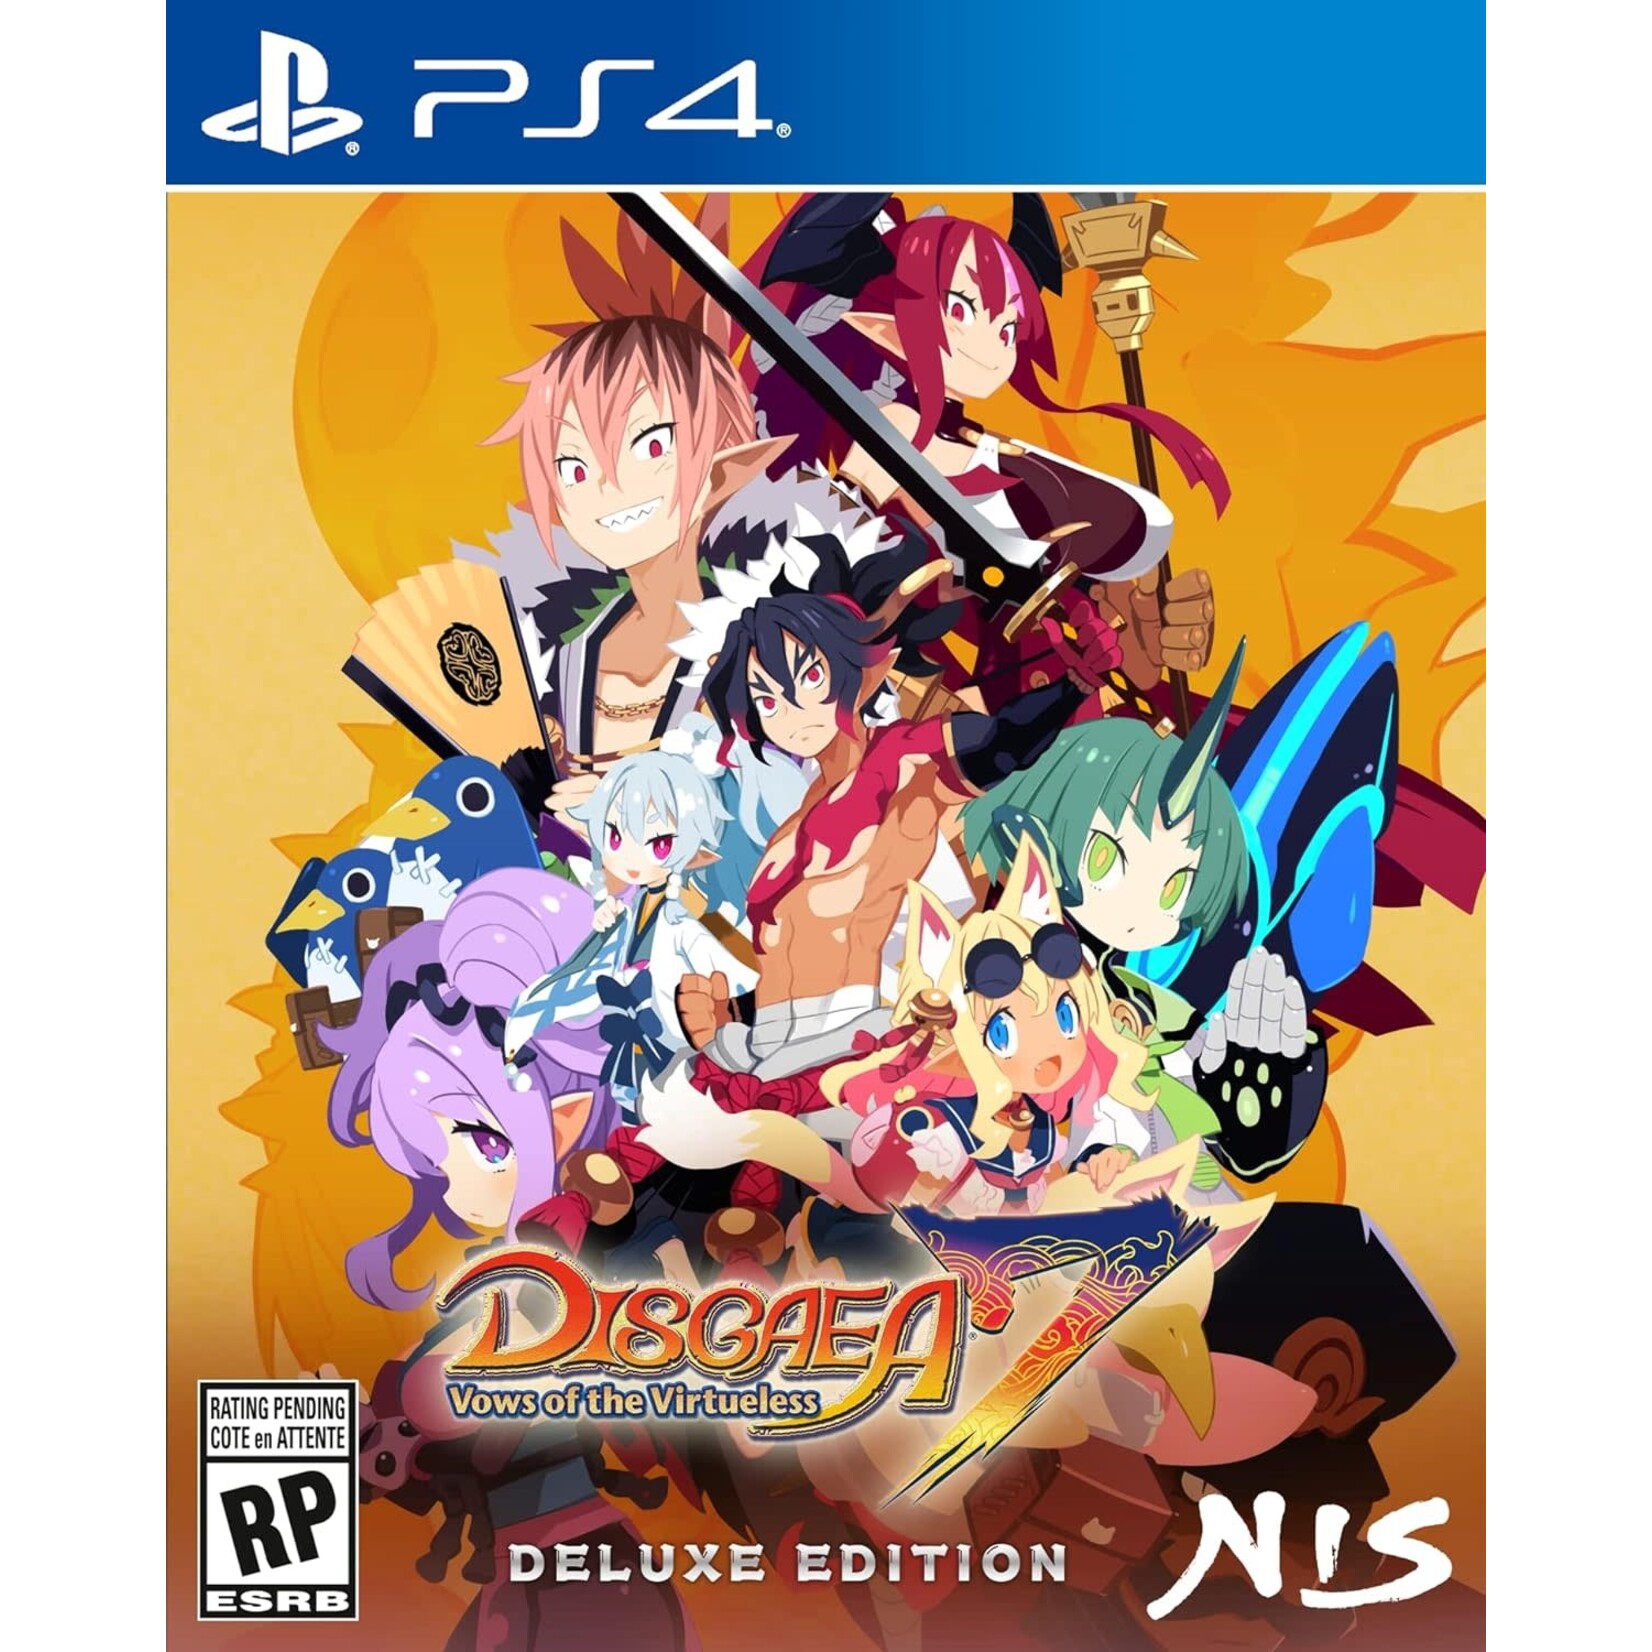 PS4-Disgaea 7 Vows of the Virtueless